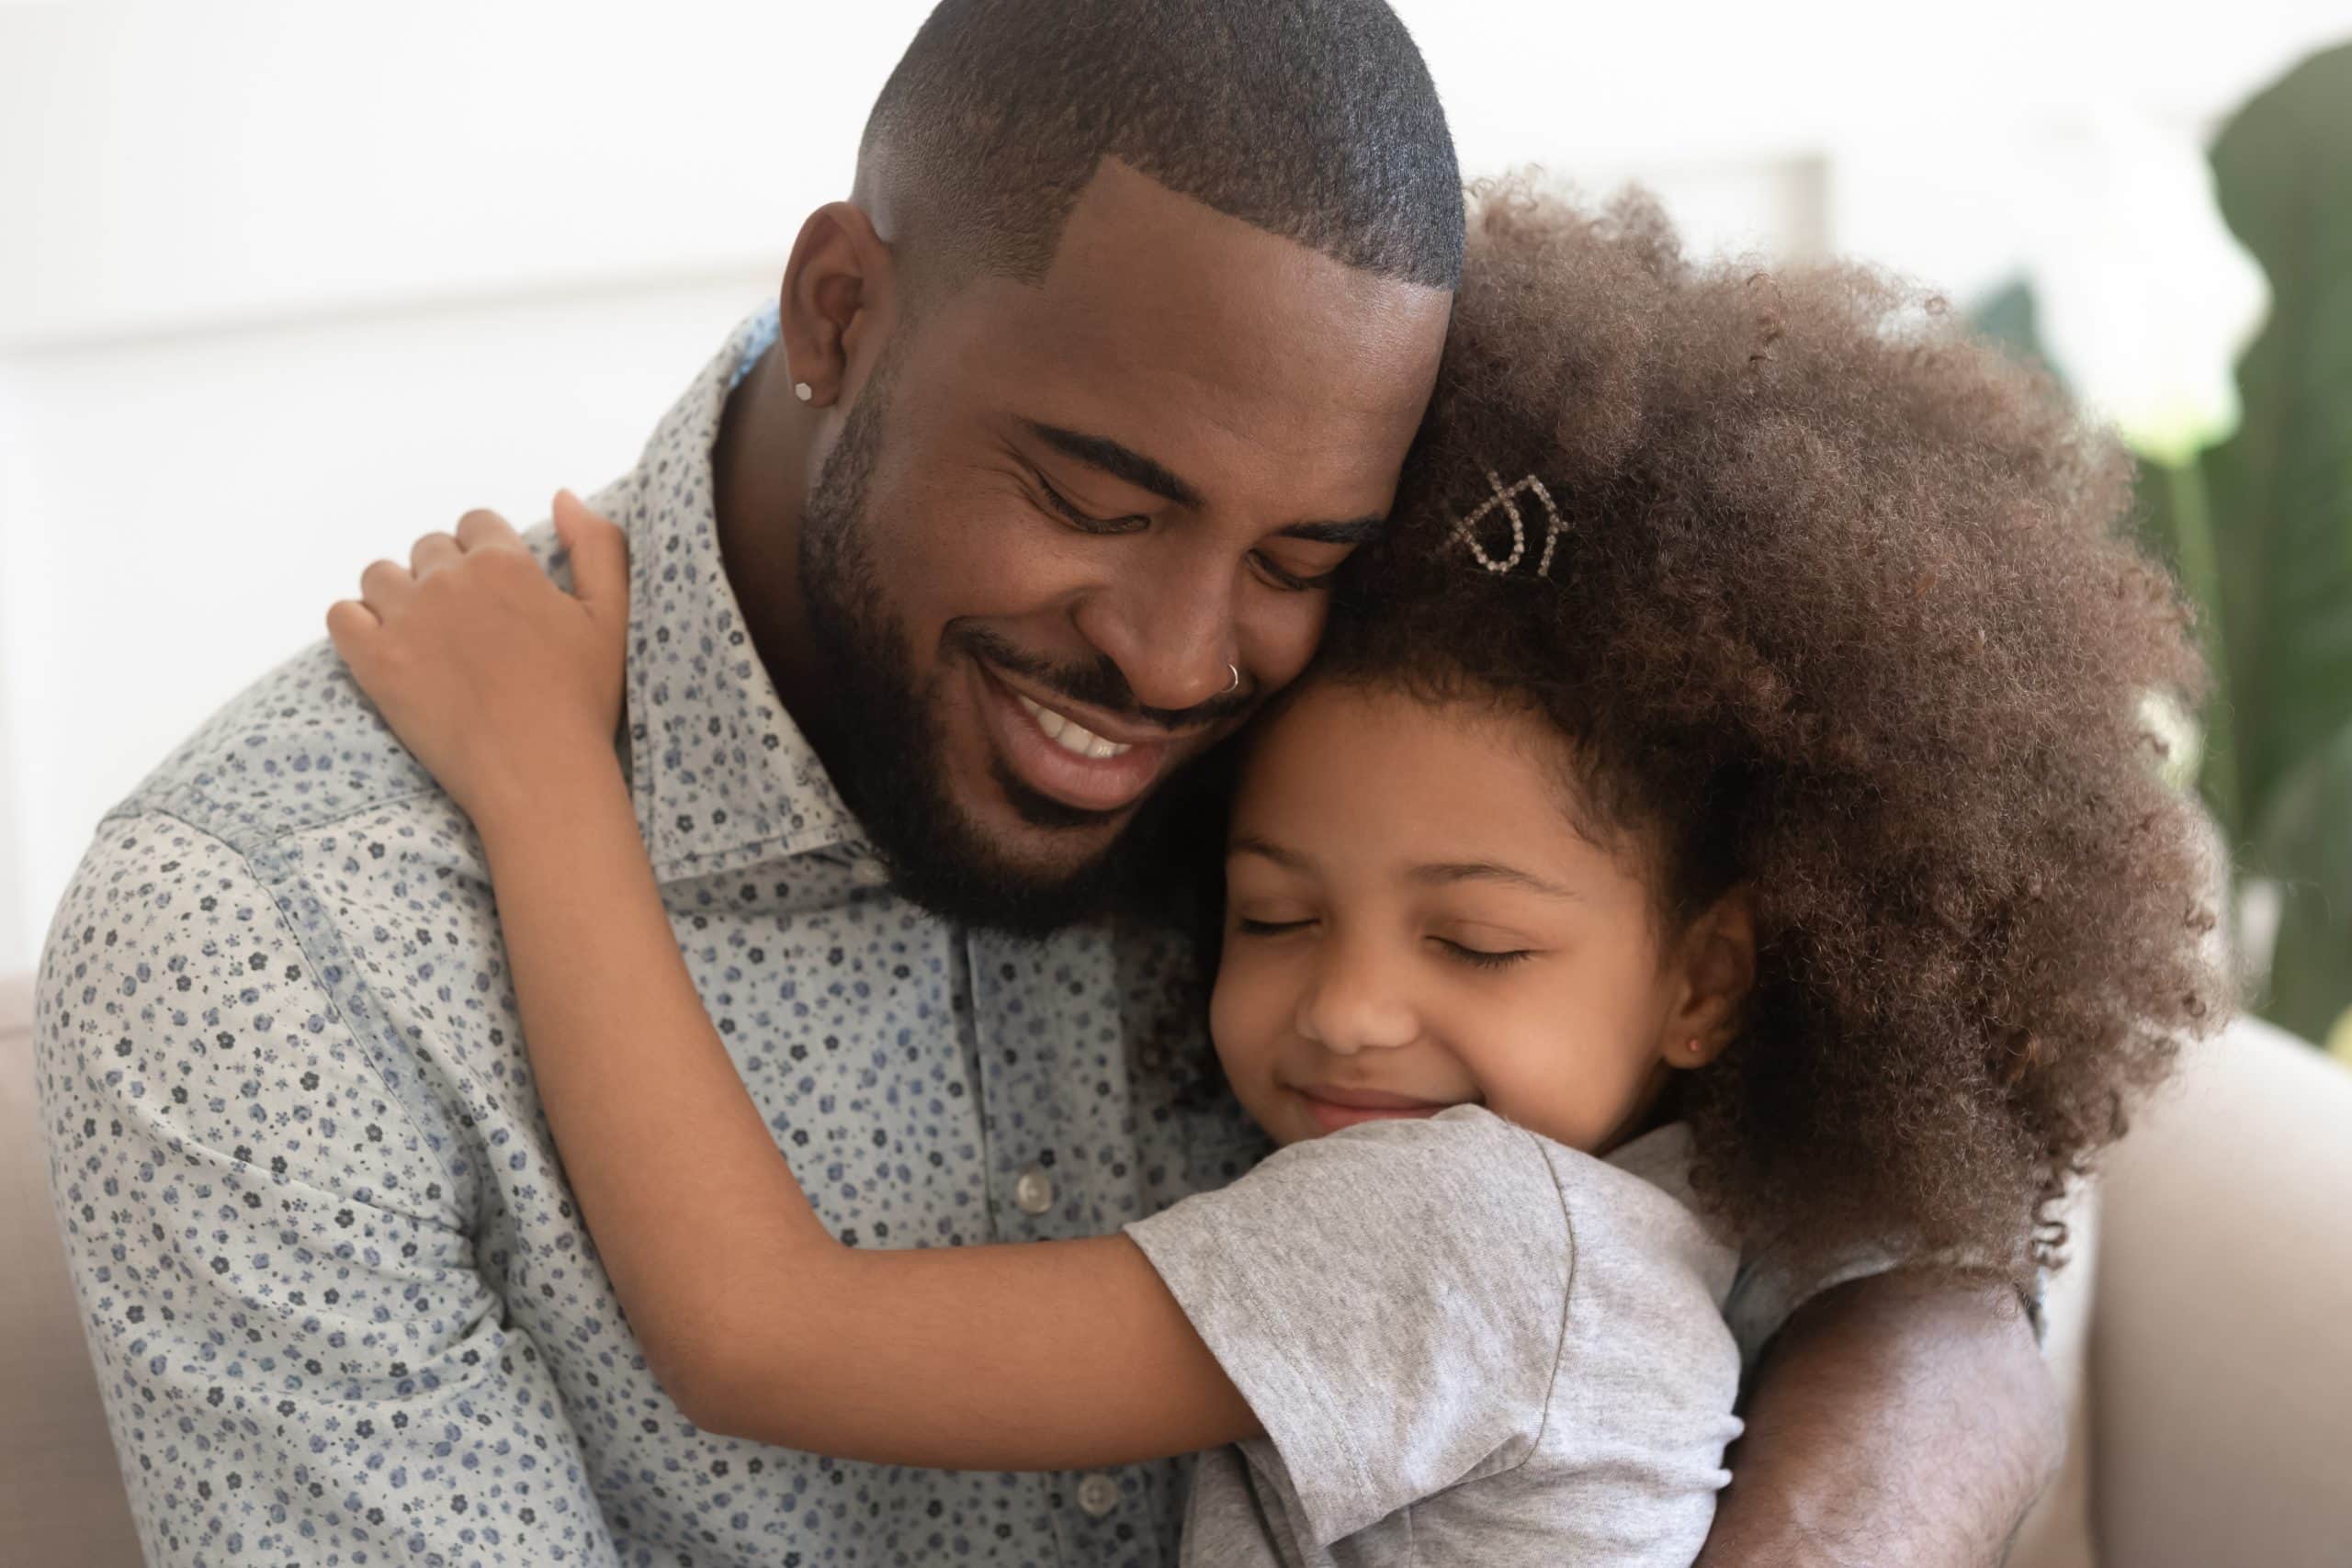 Child Maintenance Trusts. Accompanying image: loving father hugs his daughter with eyes closed